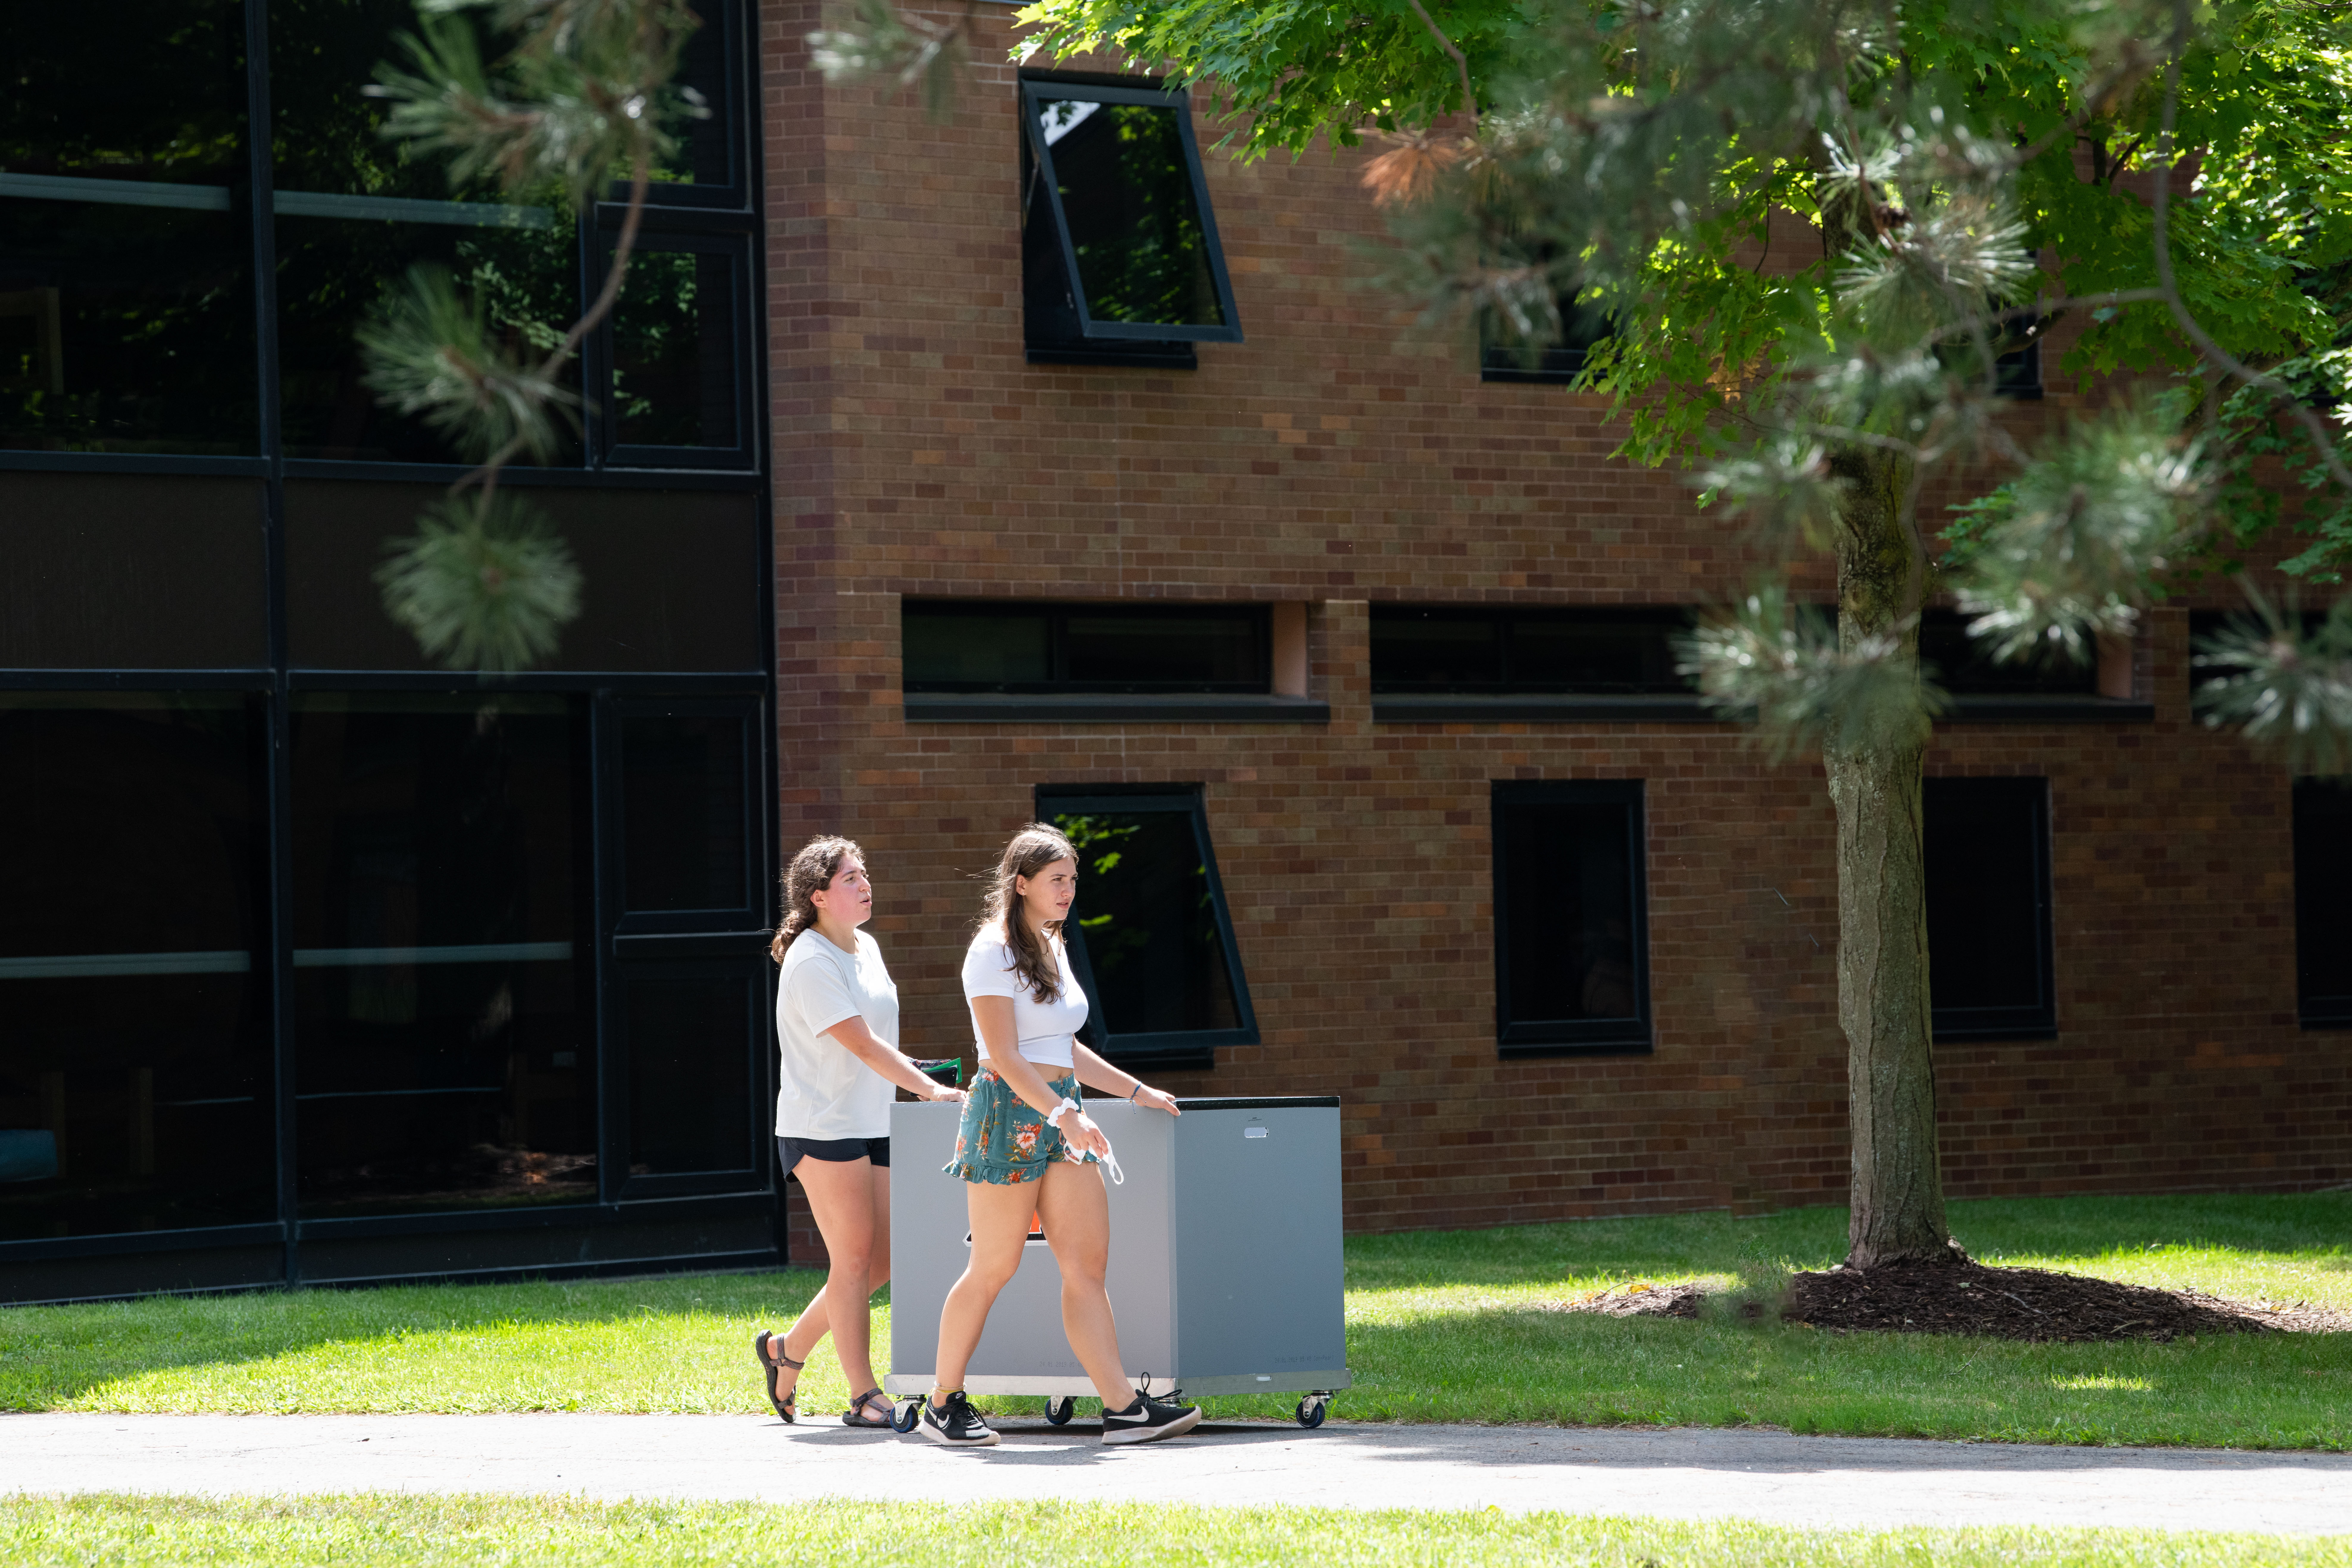 2 female presenting students push a housing cart outside in the sun